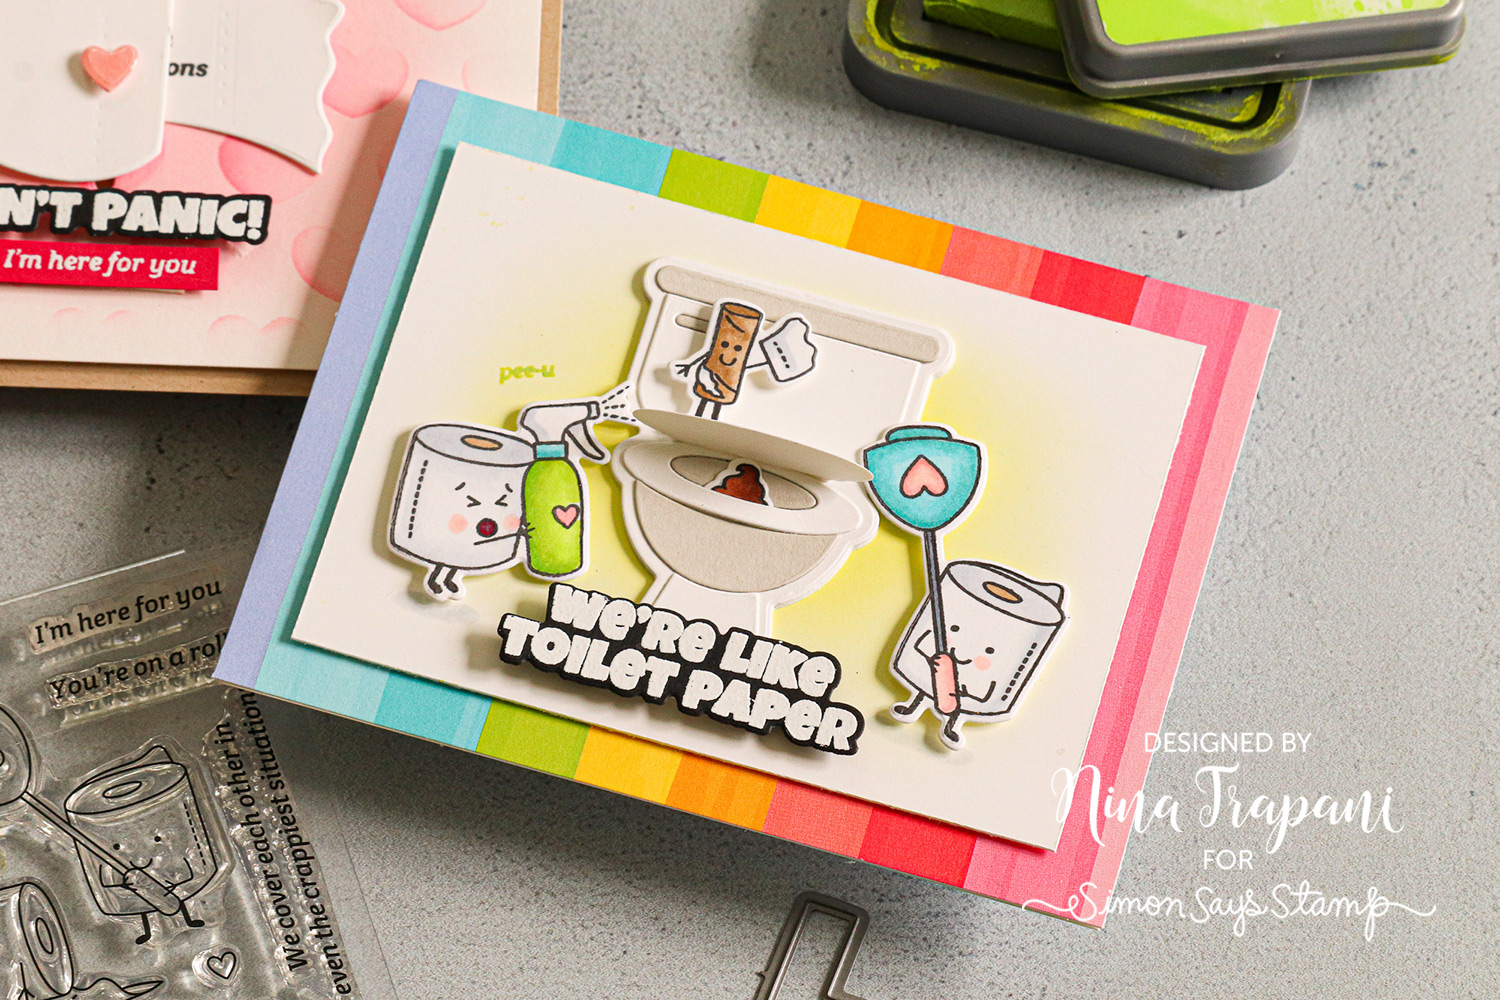 2 Interactive Toilet-Themed Cards + Simon's Let's Connect Blog Hop